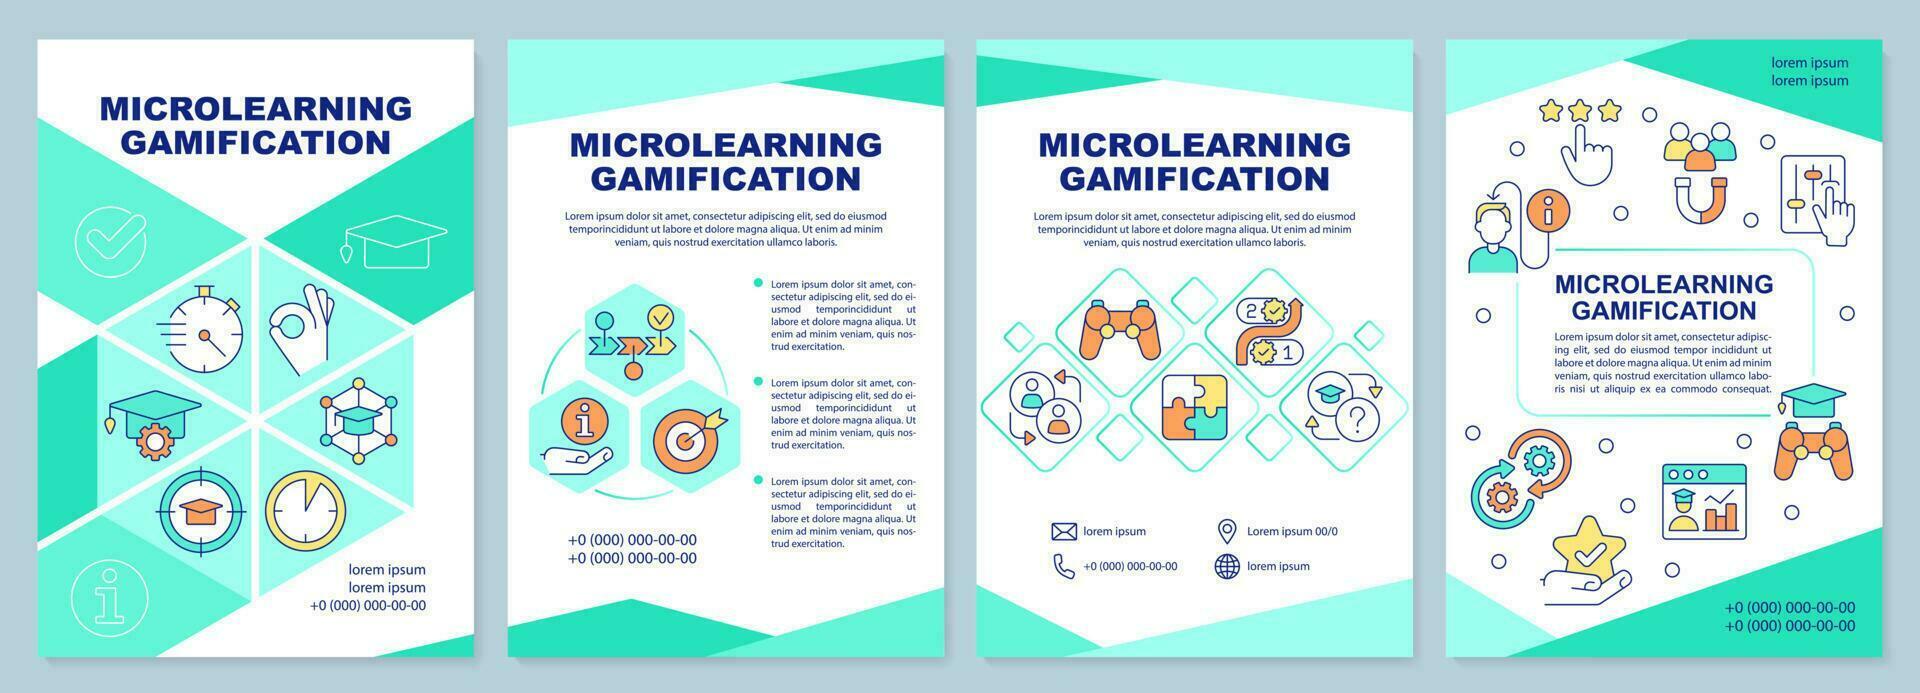 Microlearning gamification green brochure template. Education. Leaflet design with linear icons. Editable 4 vector layouts for presentation, annual reports